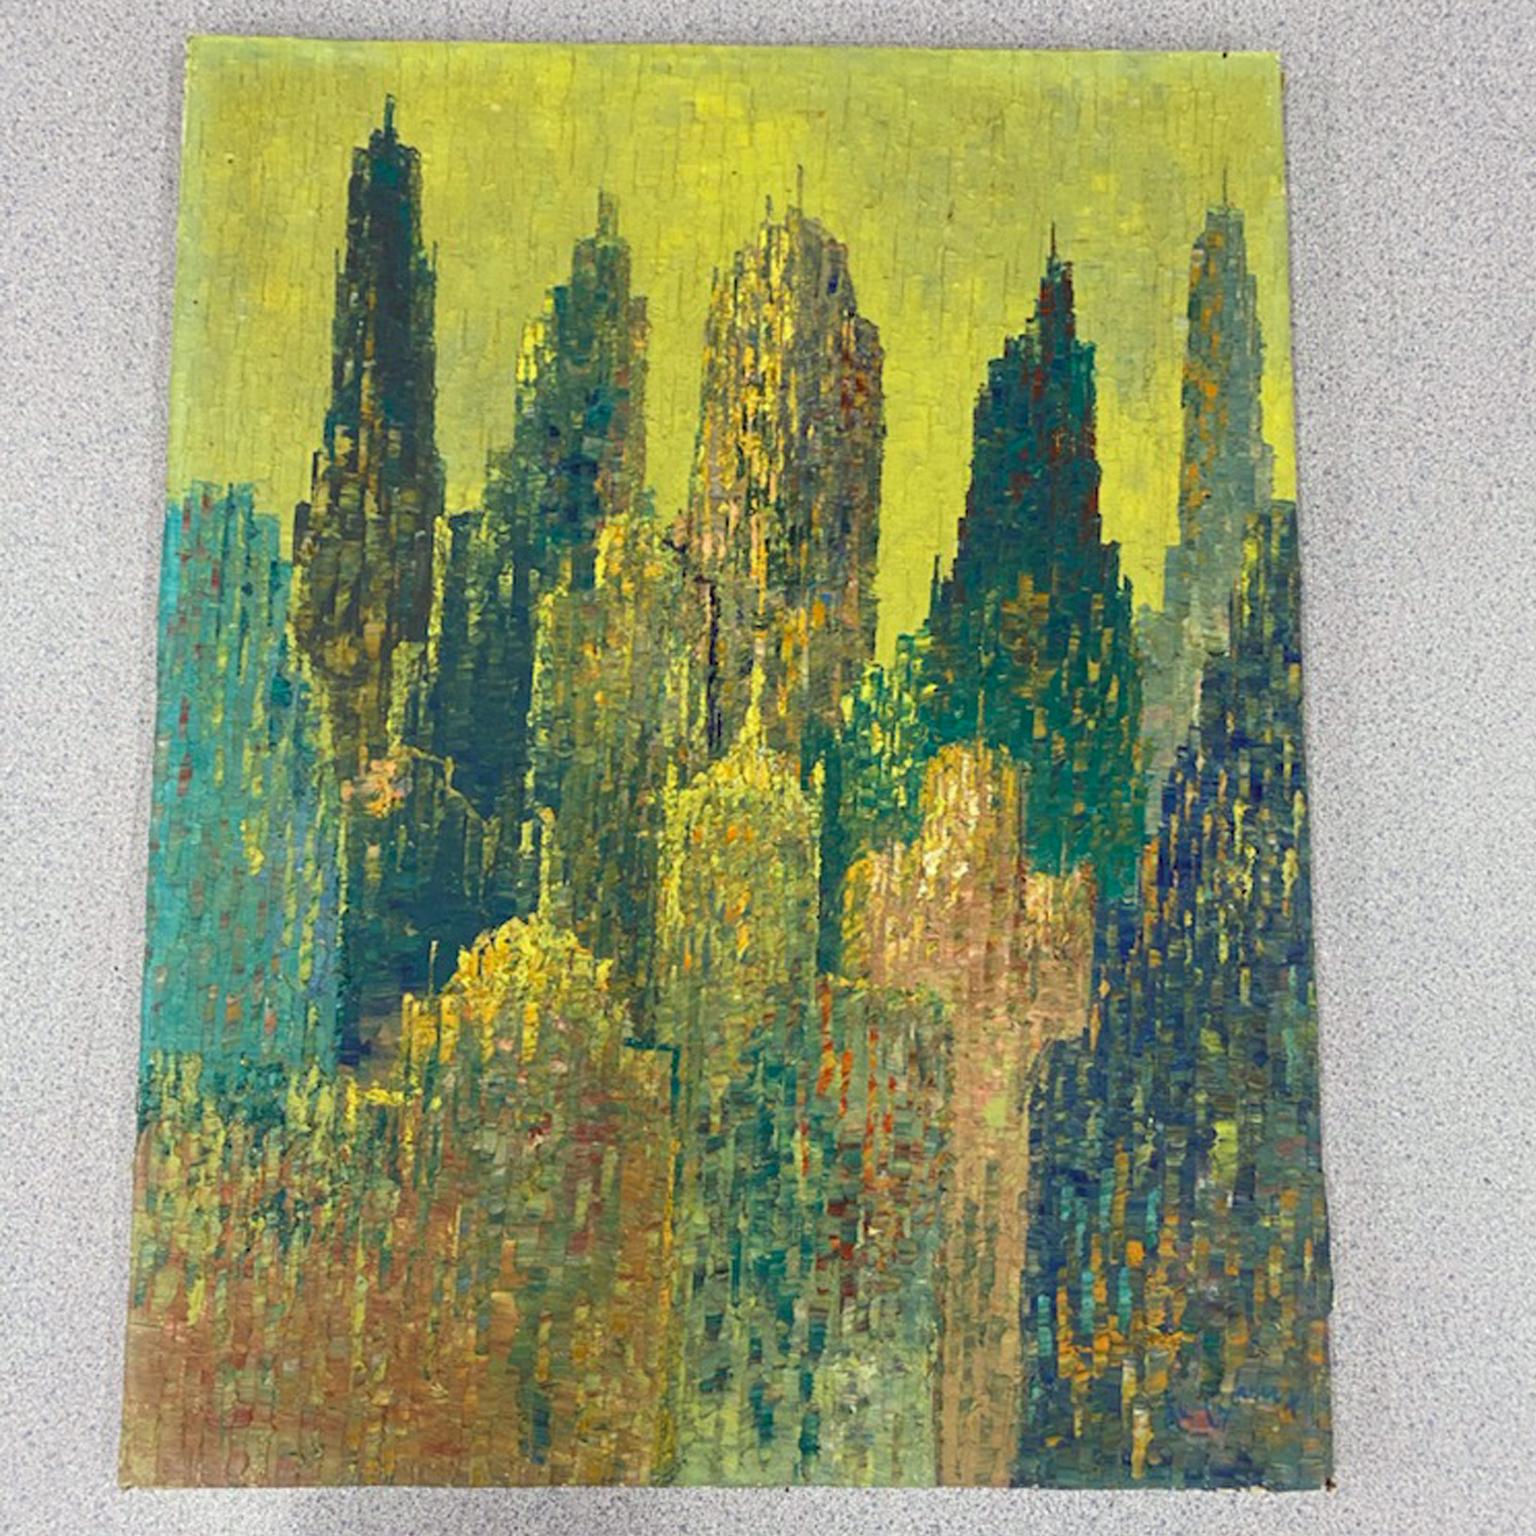 Pointillism Skyscrapers Cityscape Oil on Canvas Painting by Le Boreux For Sale 13